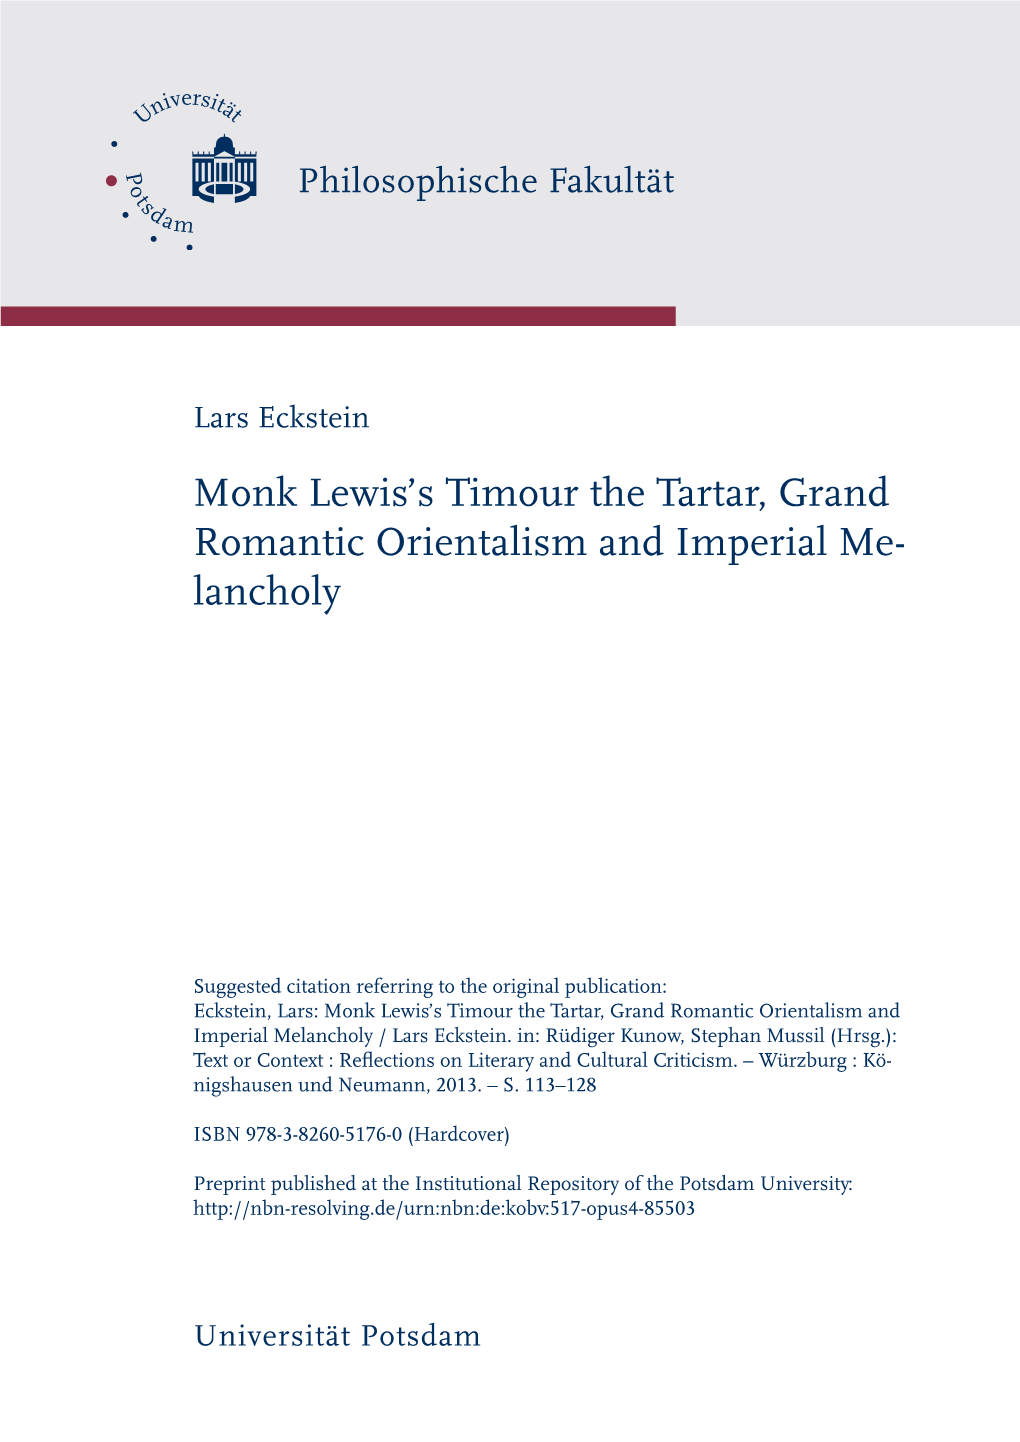 Monk Lewis's Timour the Tartar, Grand Romantic Orientalism and Imperial